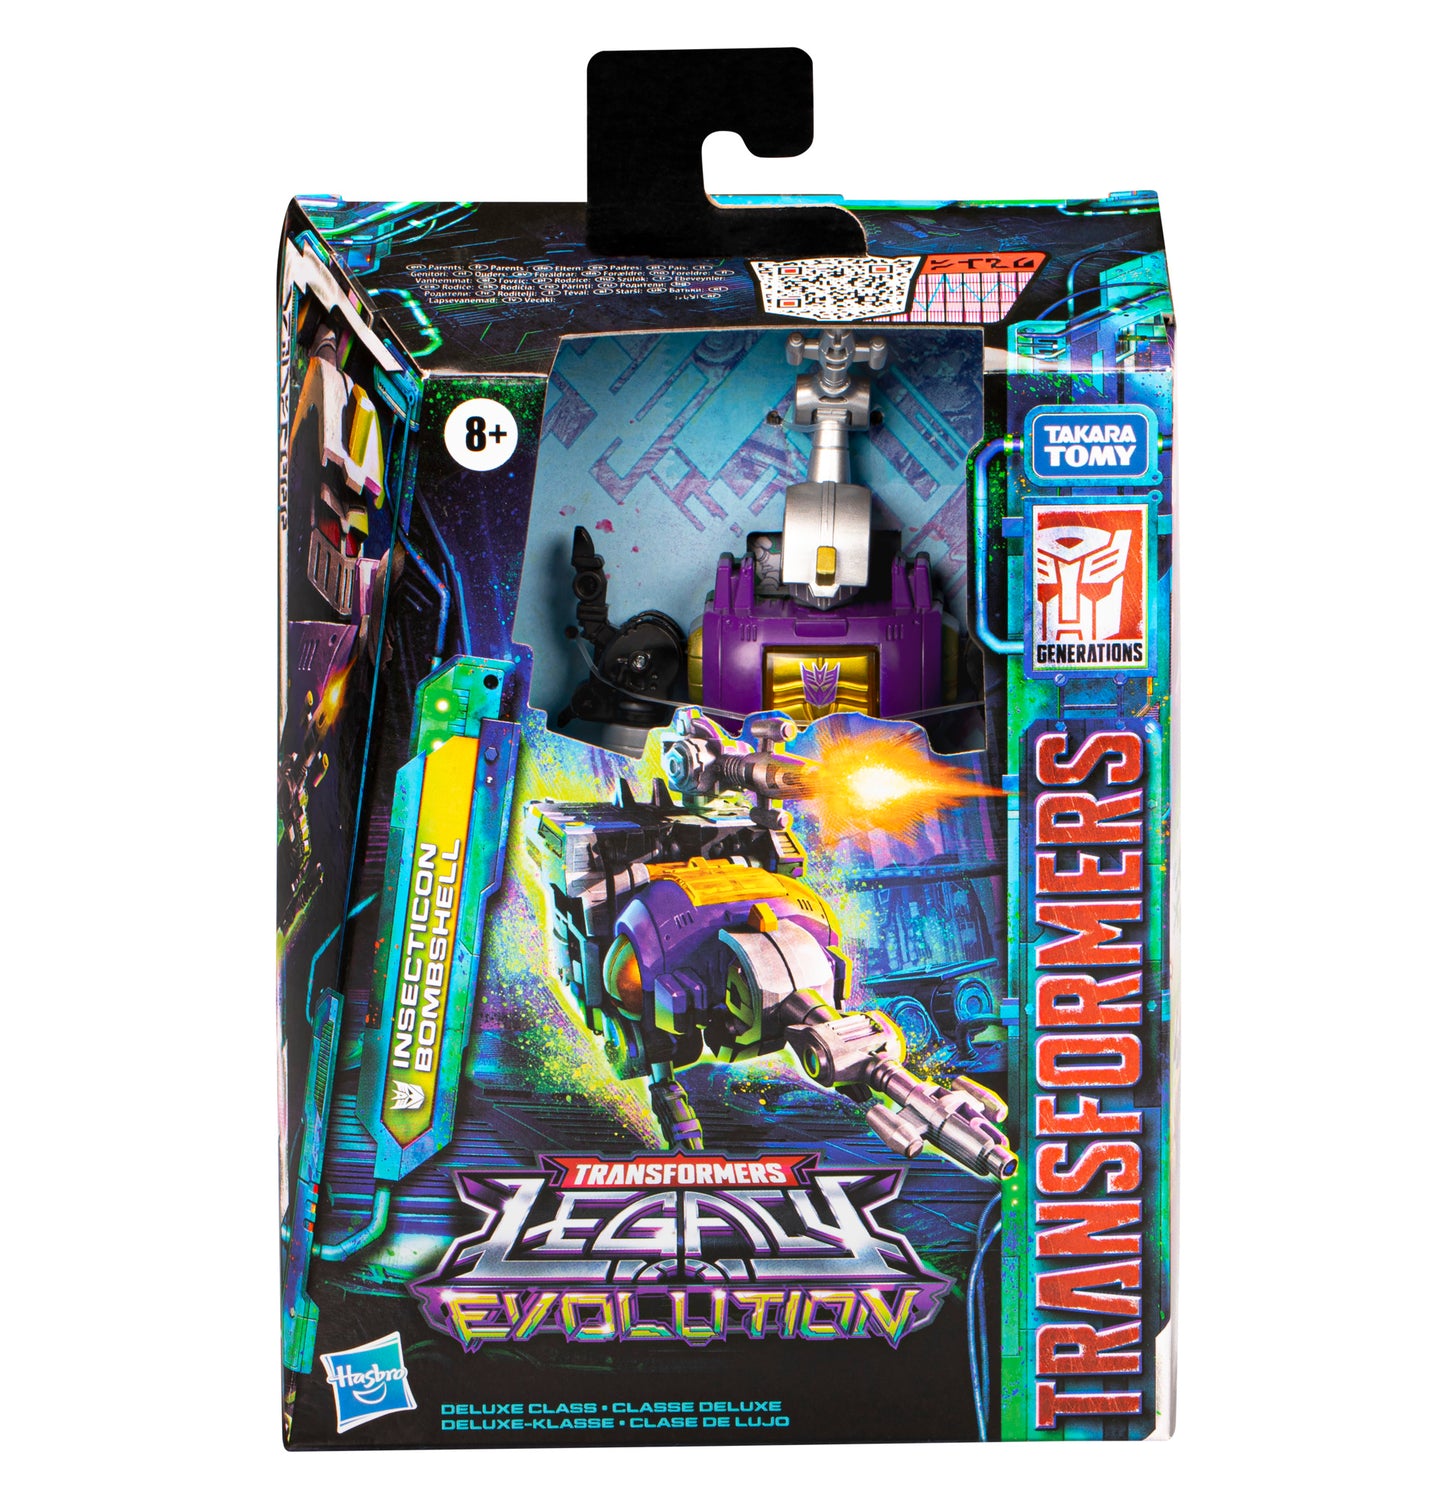 Transformers Bimbshell in front vew packaging - Heretoserveyou